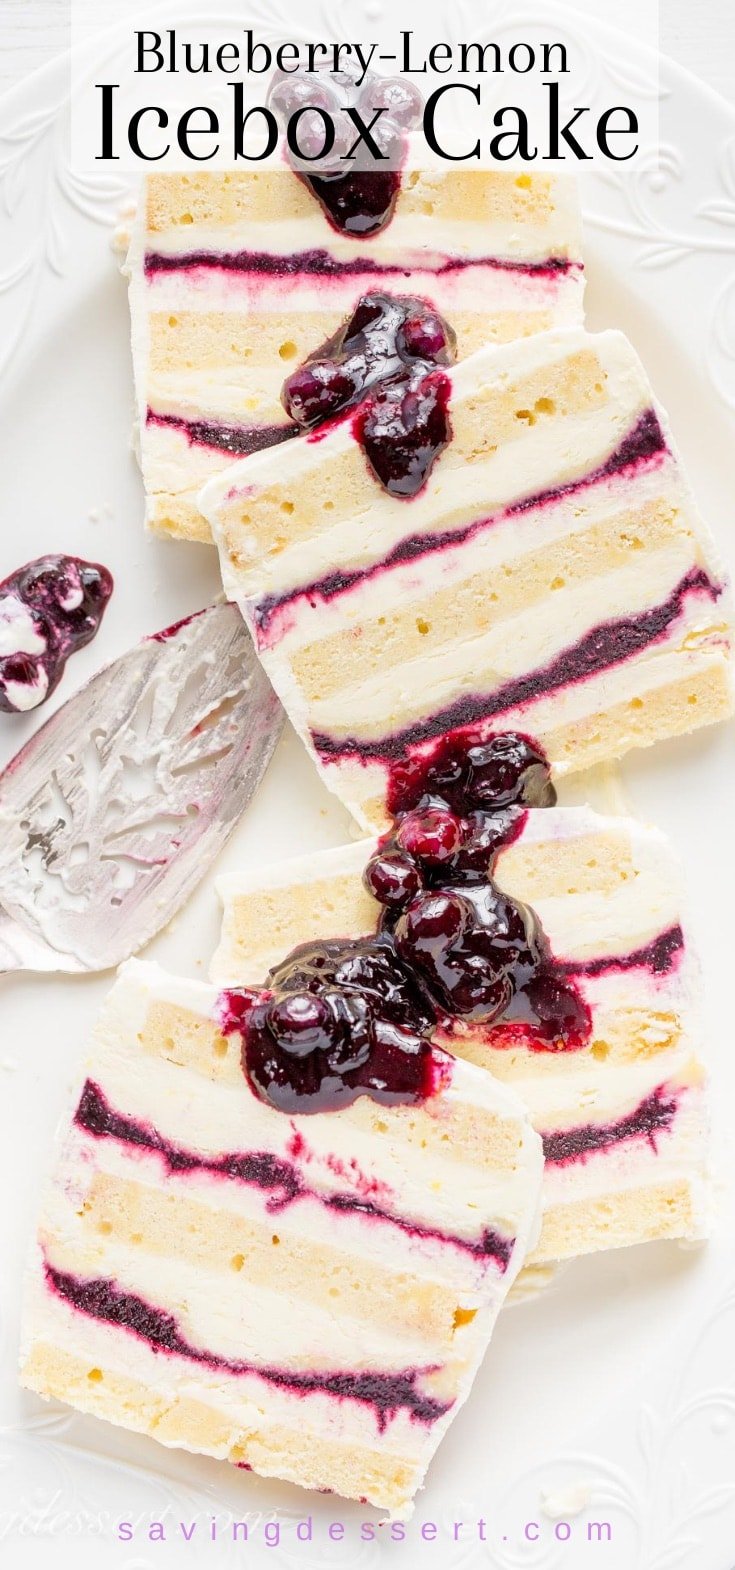 A platter of sliced blueberry and lemon icebox cake drizzled with additional blueberry sauce